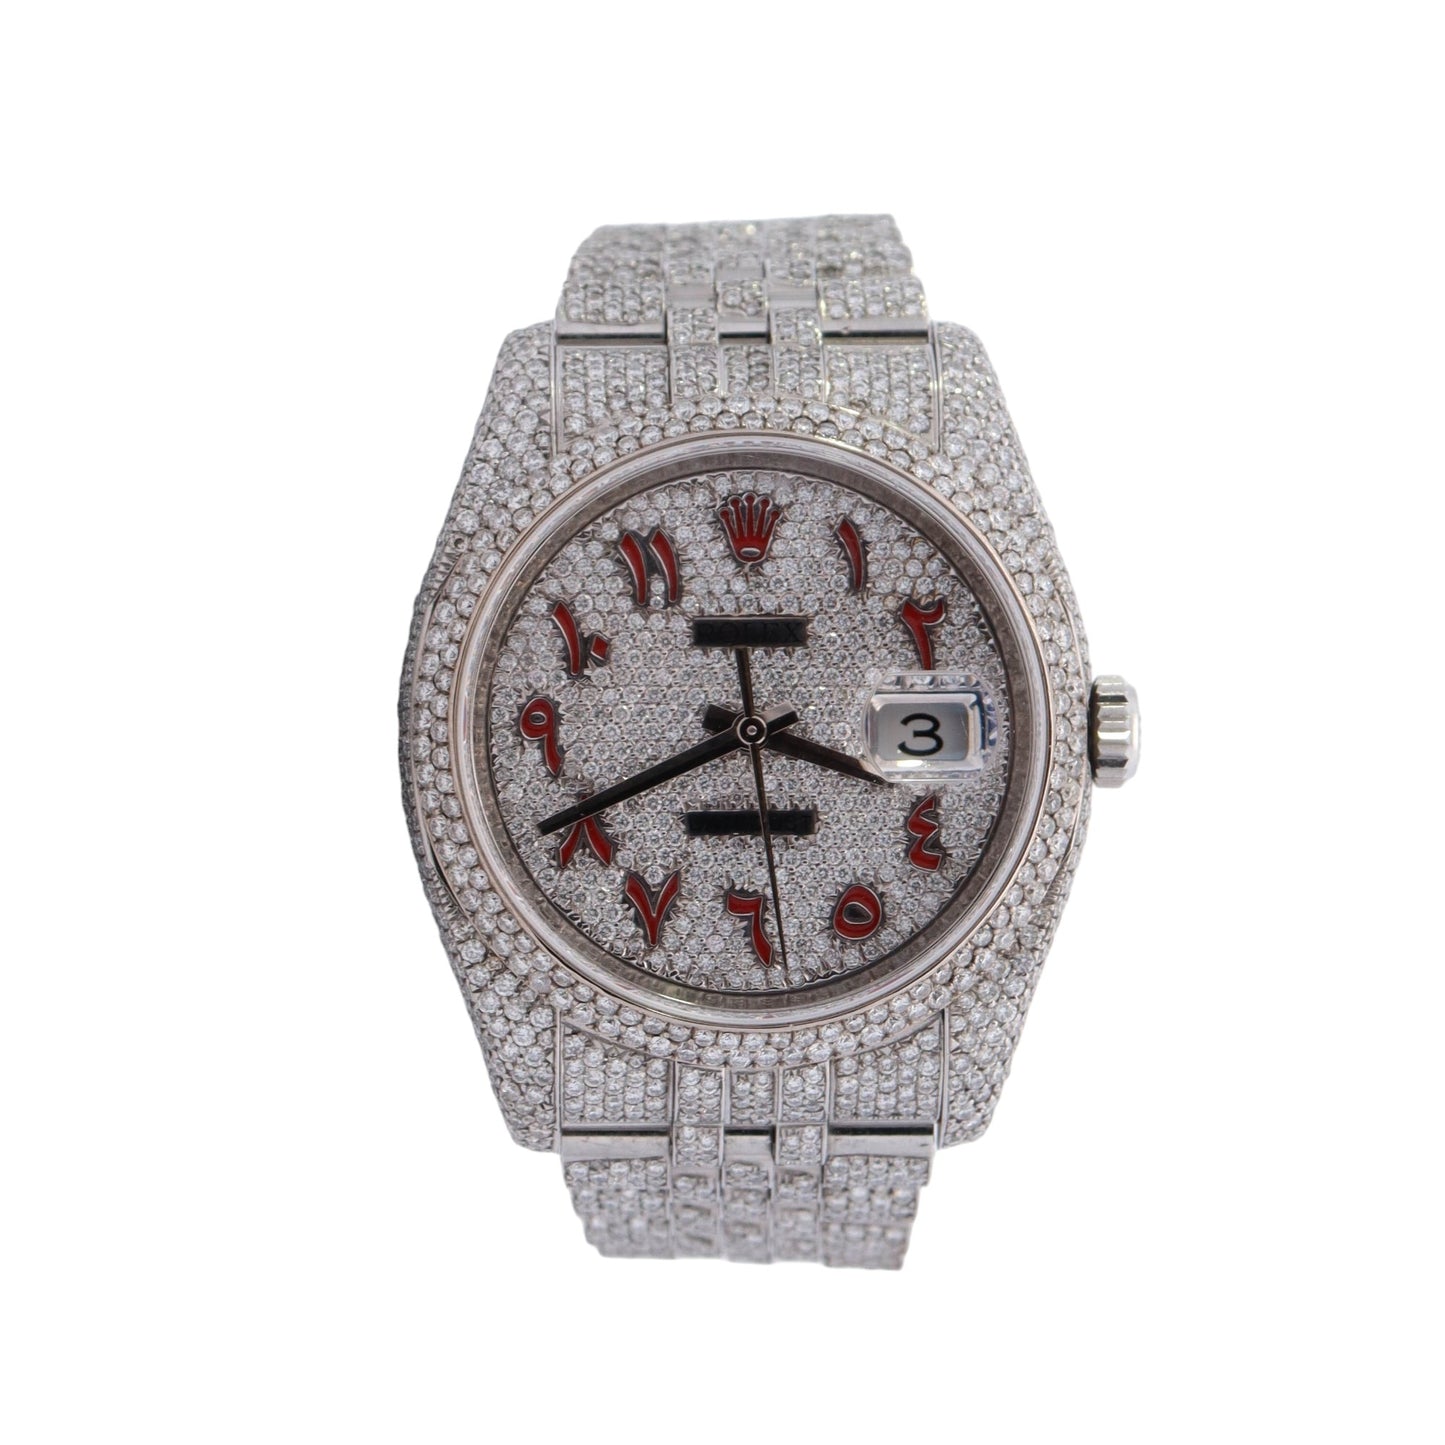 Rolex Datejust36mm Iced Out Stainless Steel Custom Pave Arabic Dial Watch Reference #: 116234